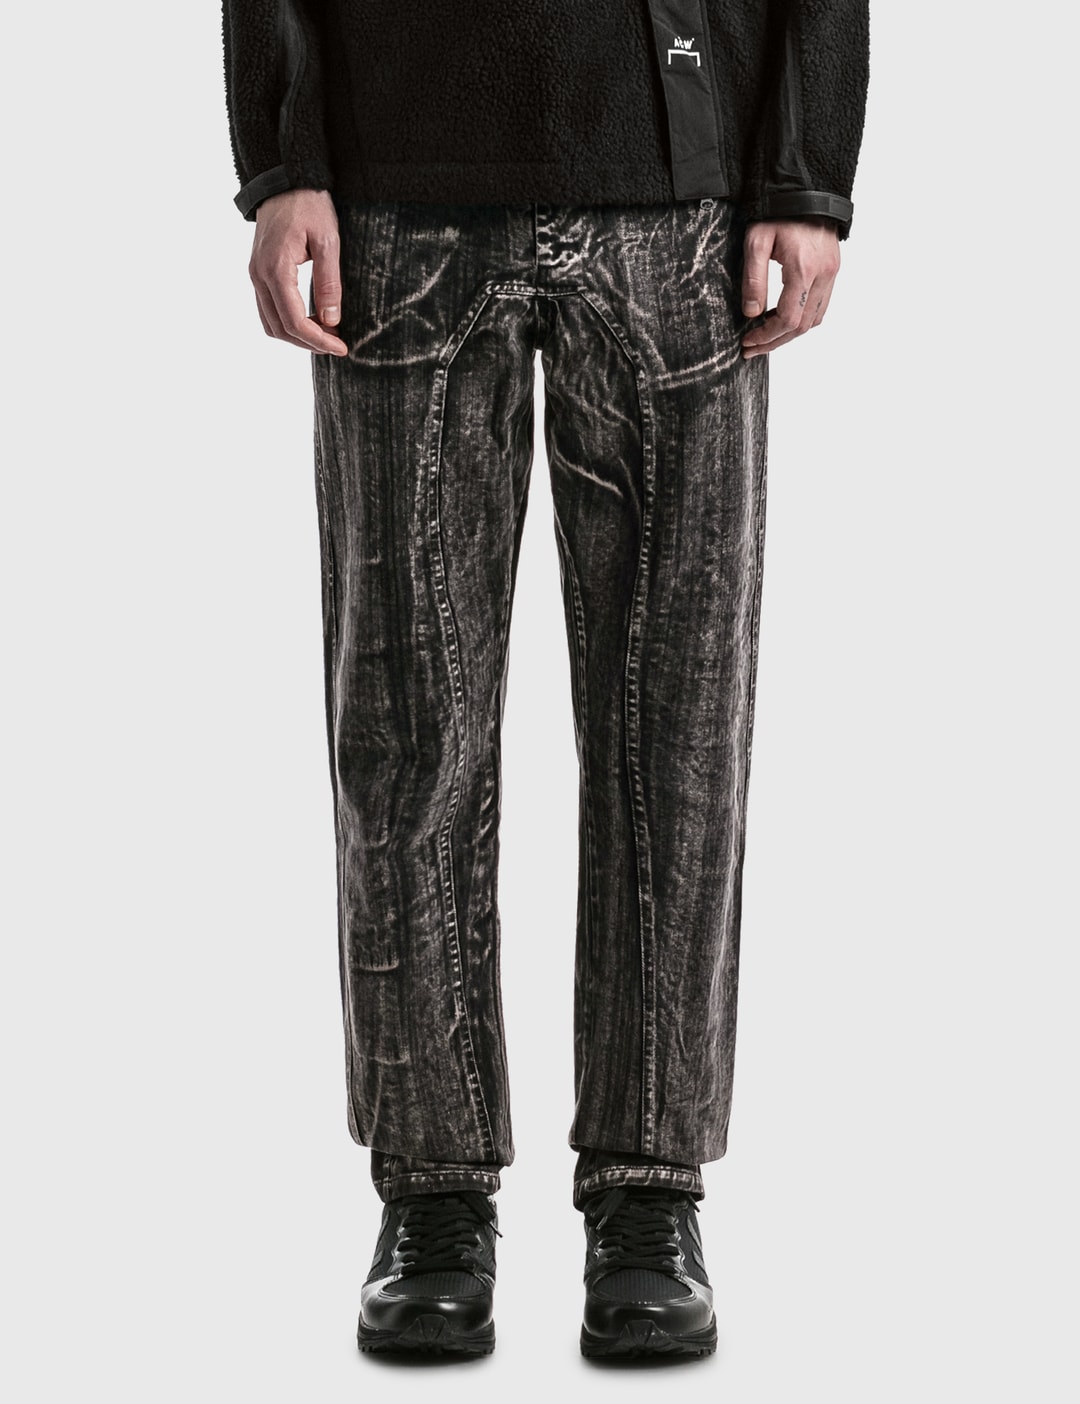 A-COLD-WALL* - Painters Pants | HBX - Globally Curated Fashion and ...